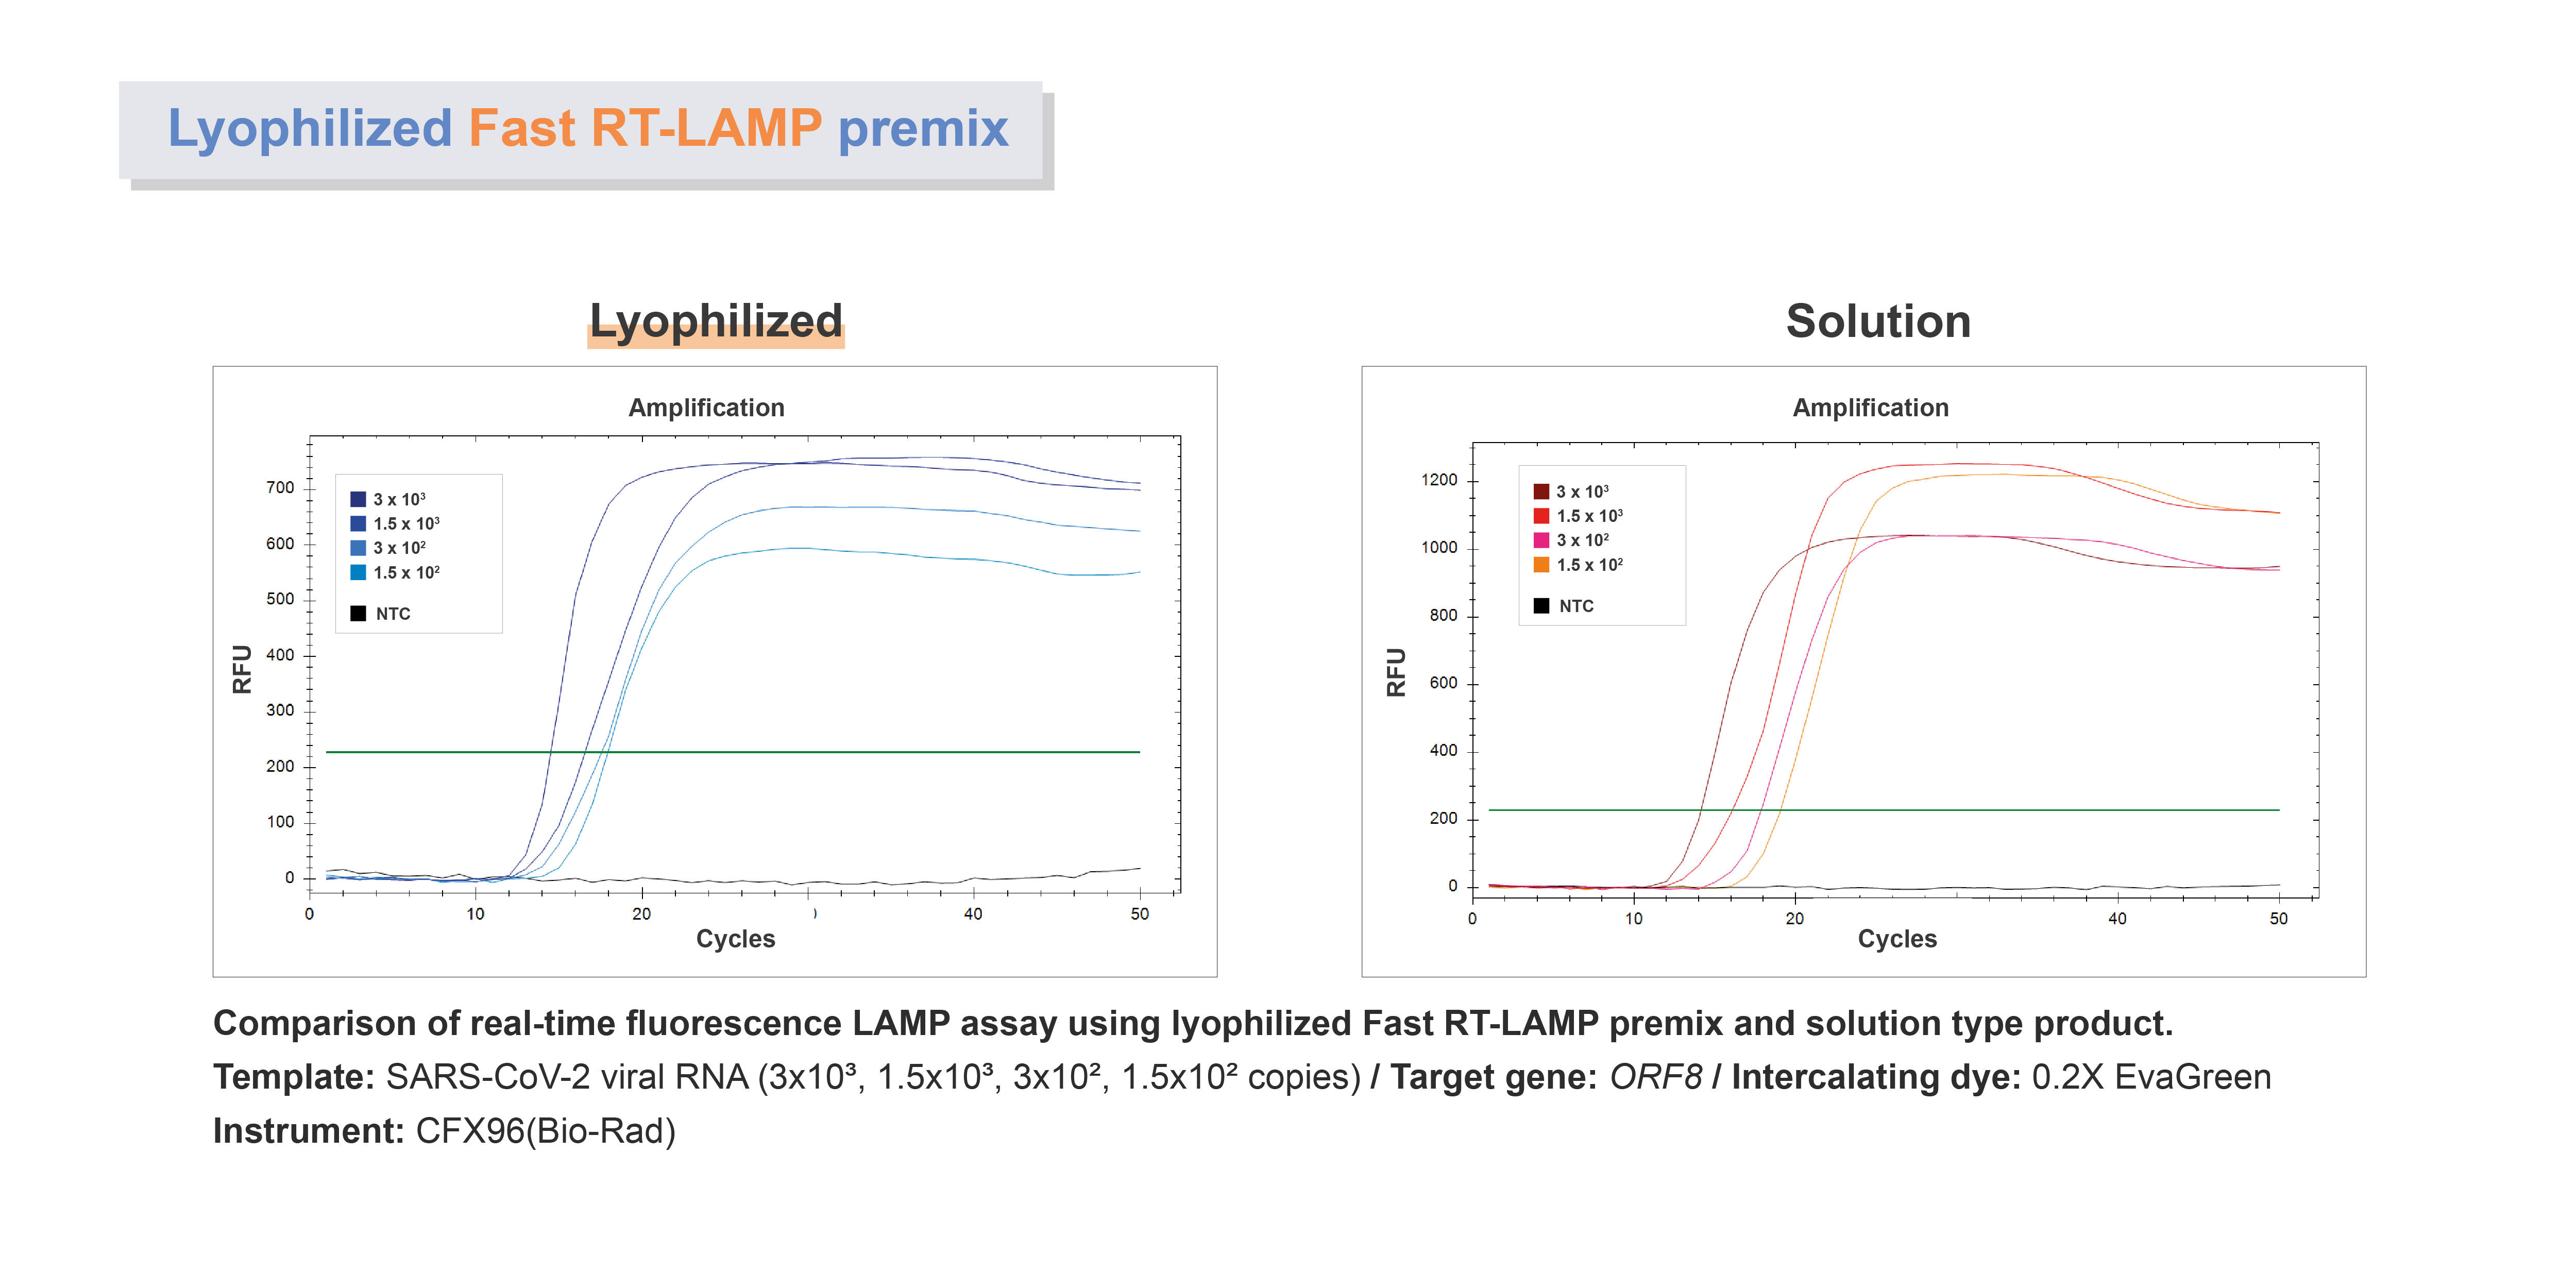 LFRLP_Figure. Comparison of real-time fluorescence LAMP assay using lyophilized Fast RT-LAMP premix and solution type product.